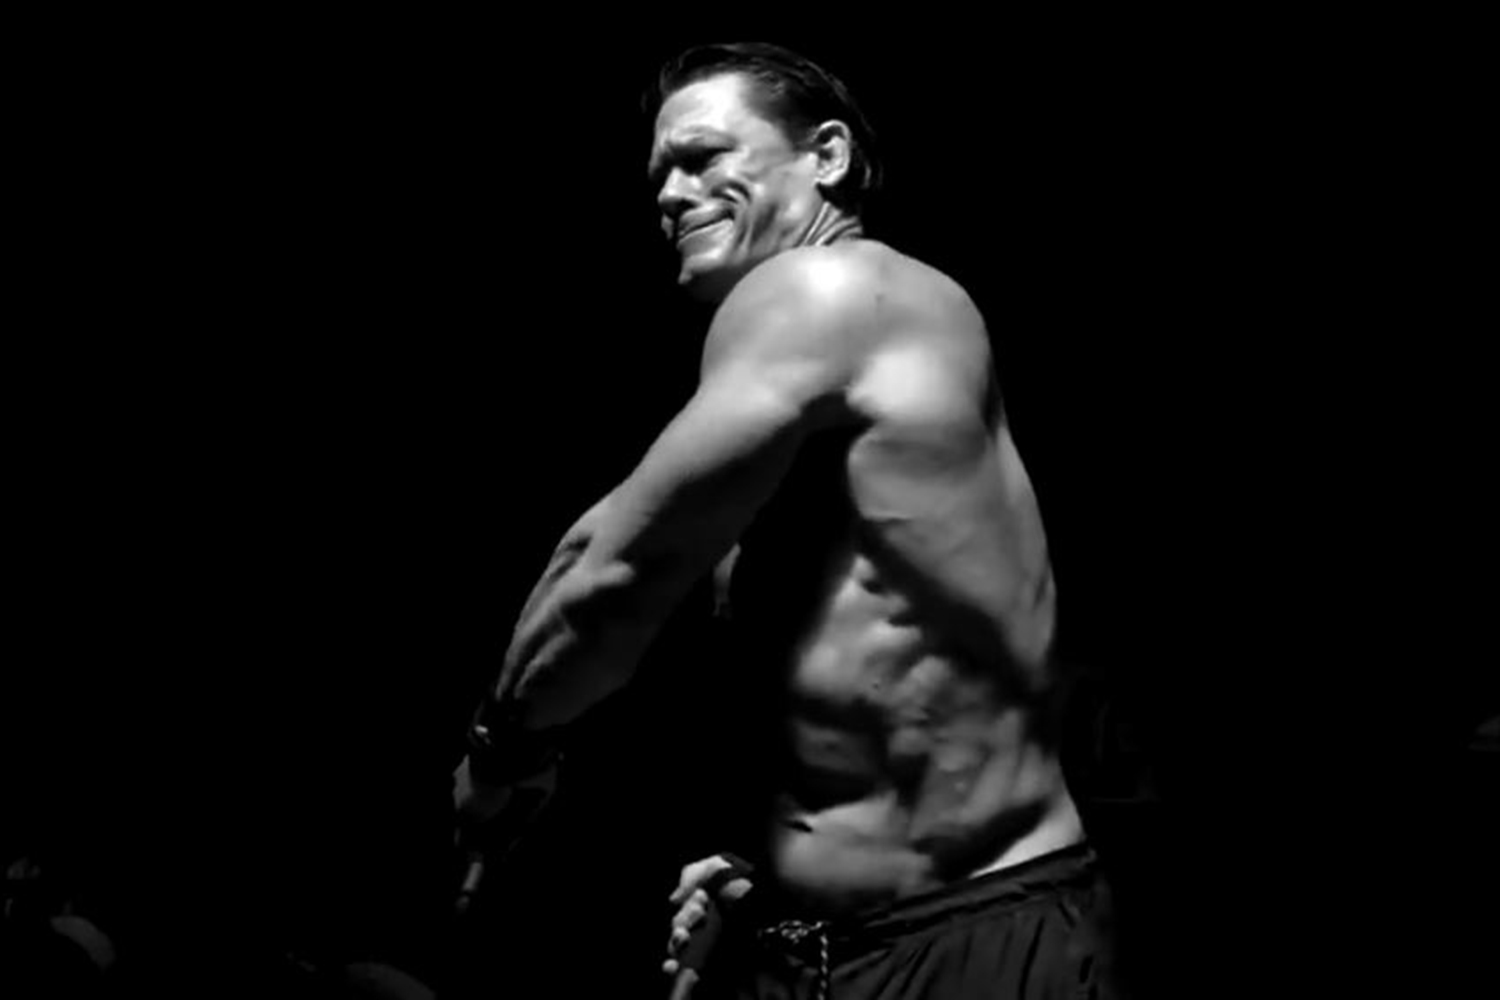 WWE legend John Cena shows off incredible physique aged 44 as he stars in new Fast & Furious Hollywood blockbuster